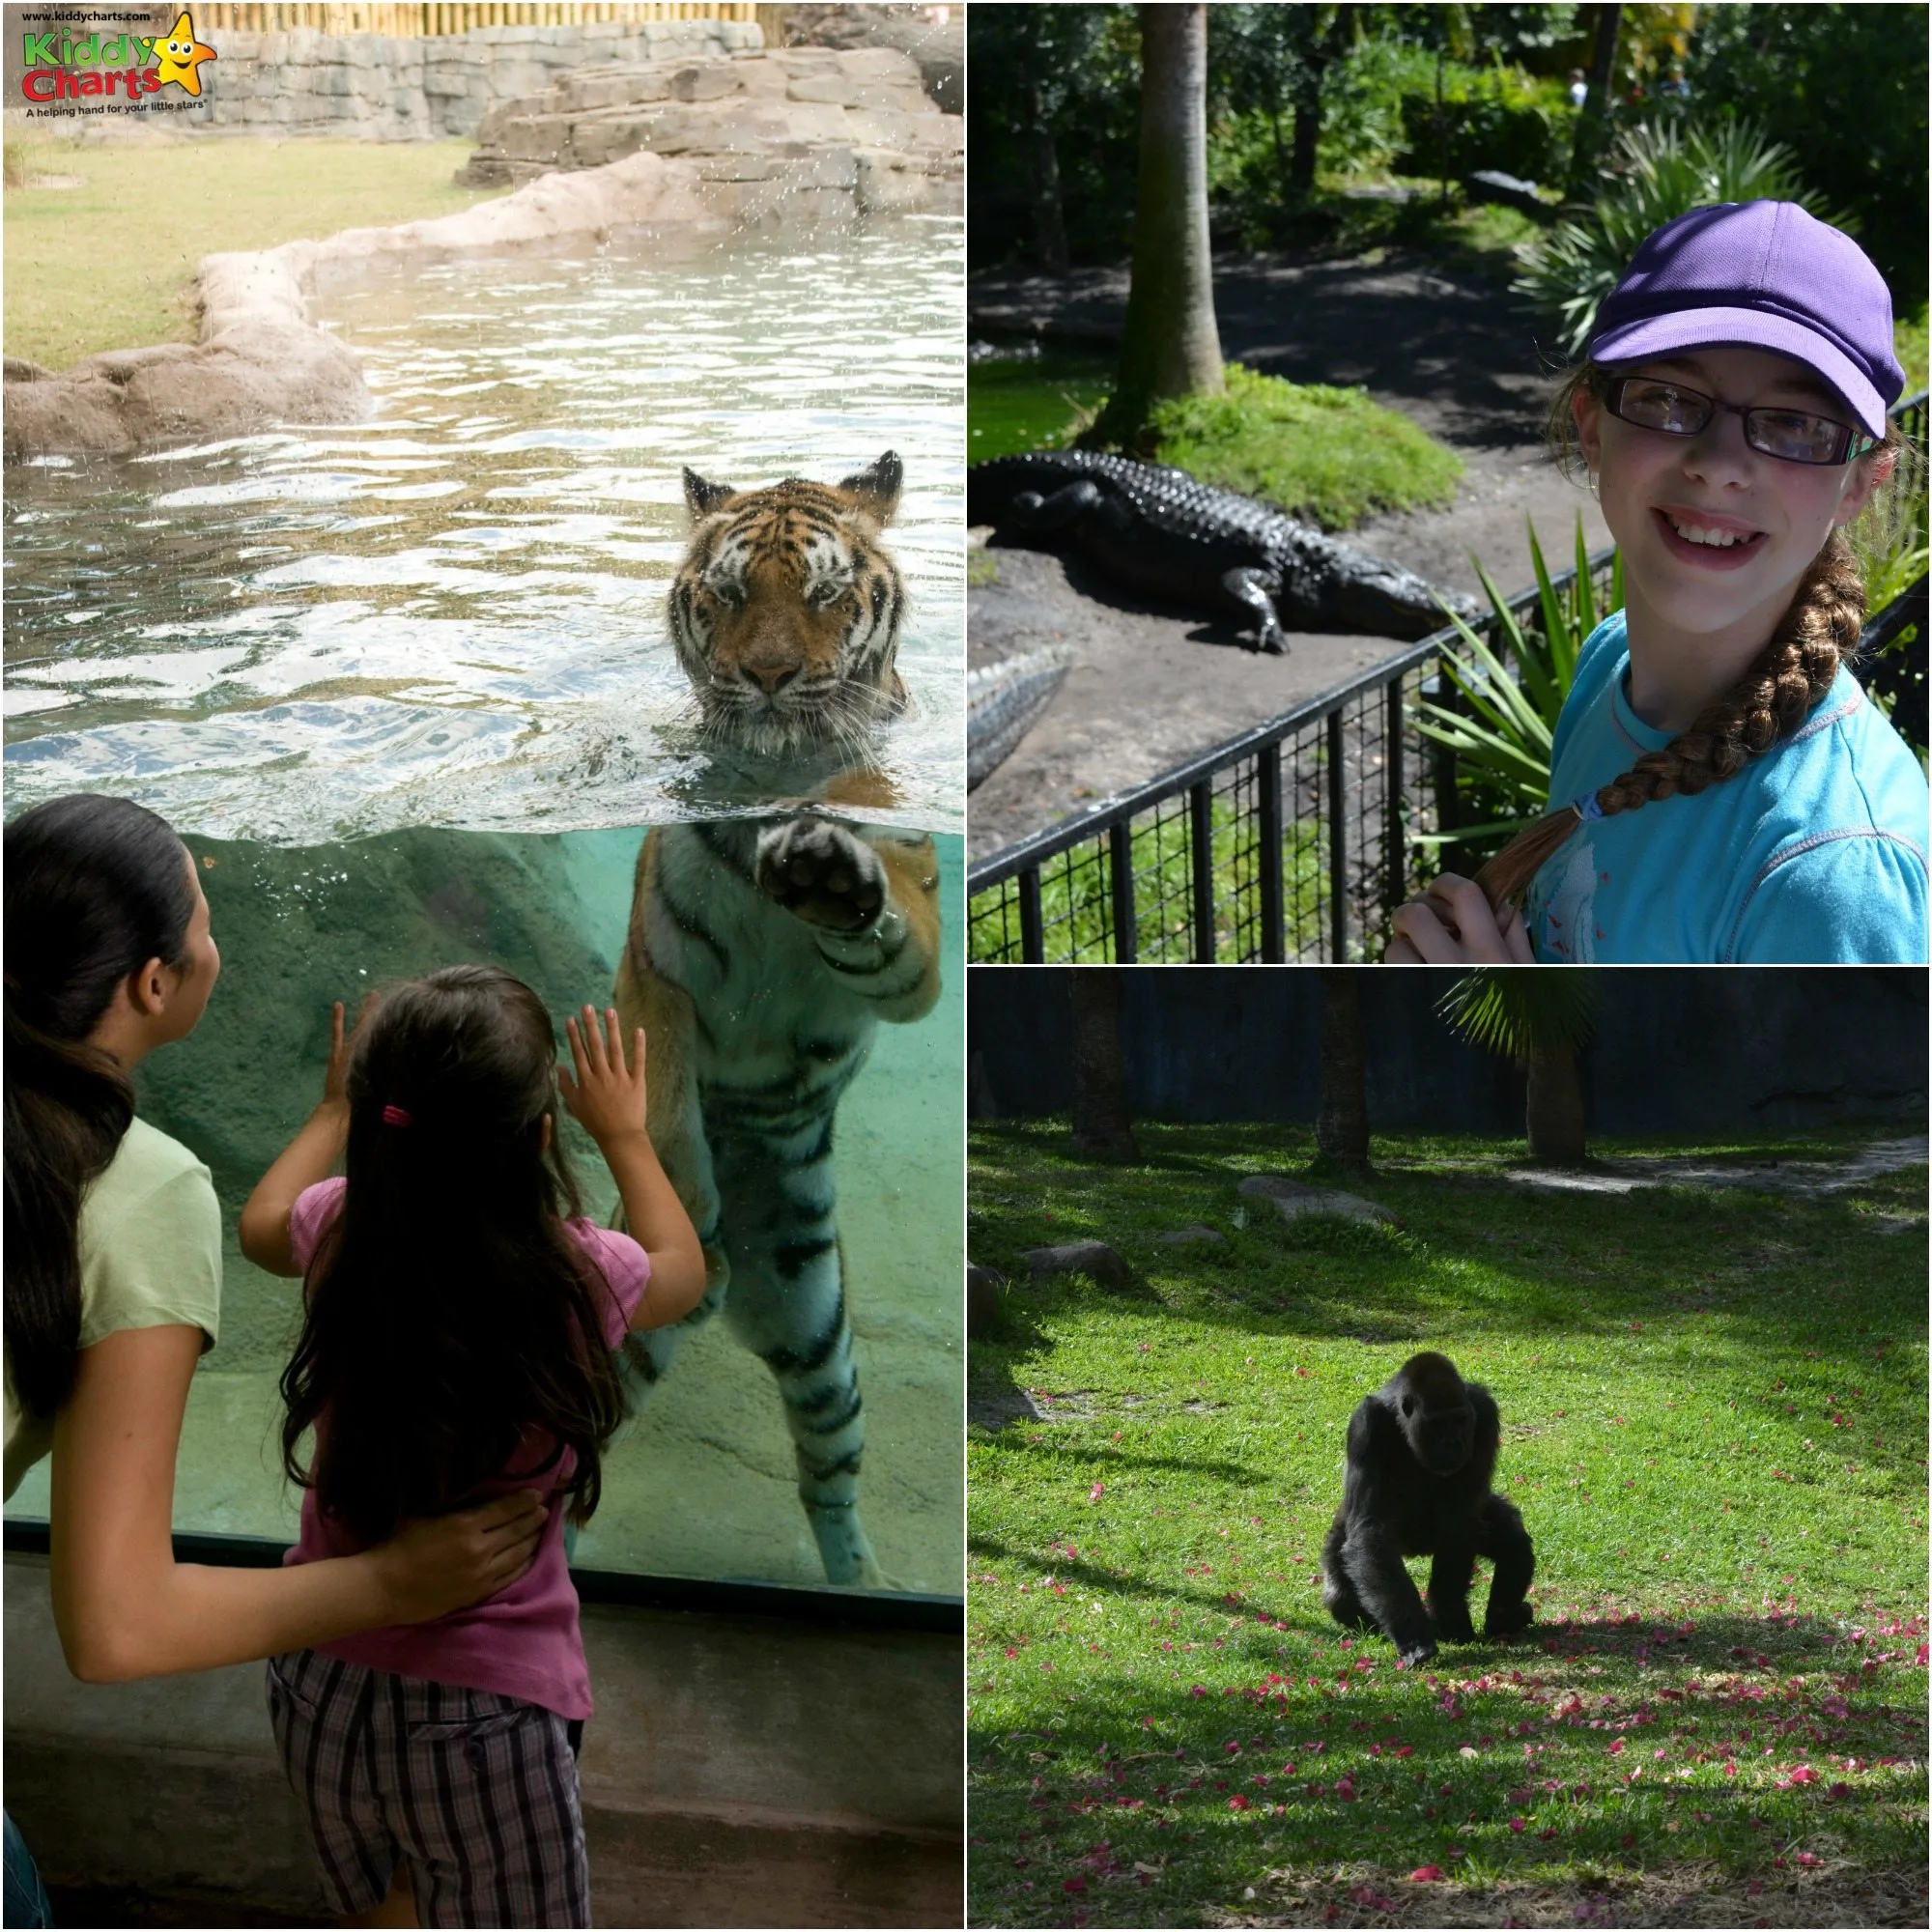 The animals alone are well worth a visit to Busch Gardens Tampa - why not check out the other reasons on my site?